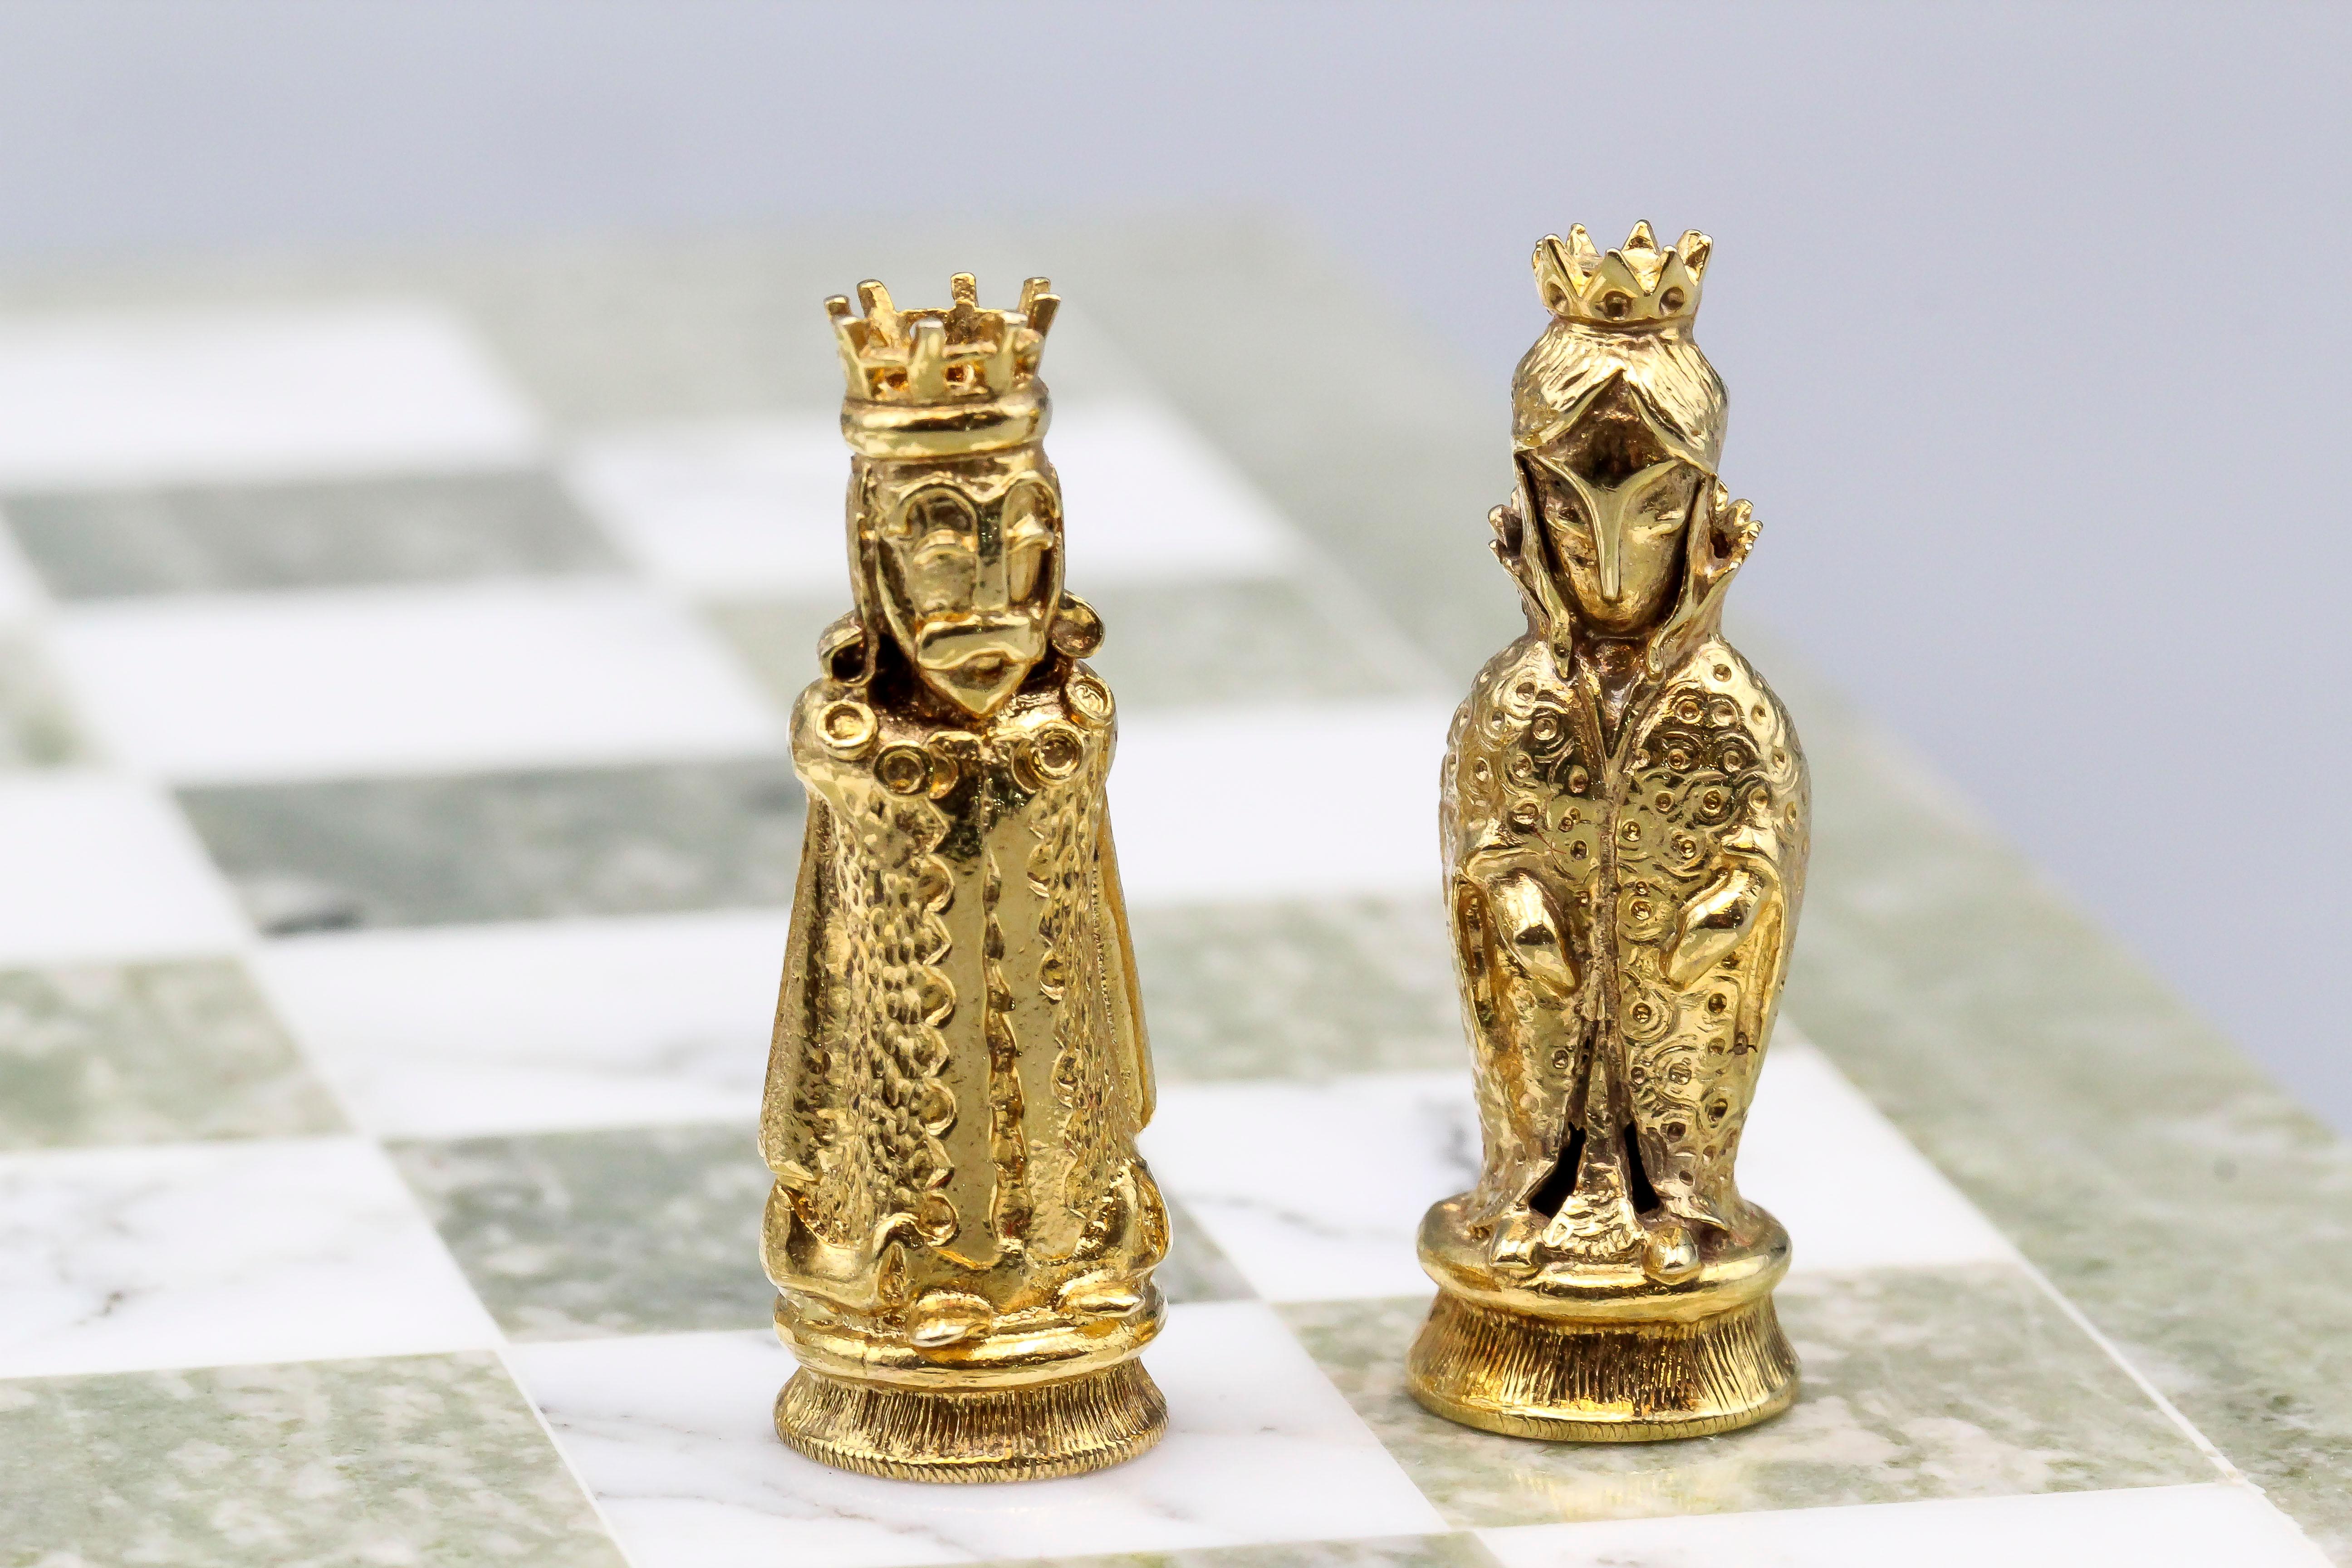 white and gold chess set